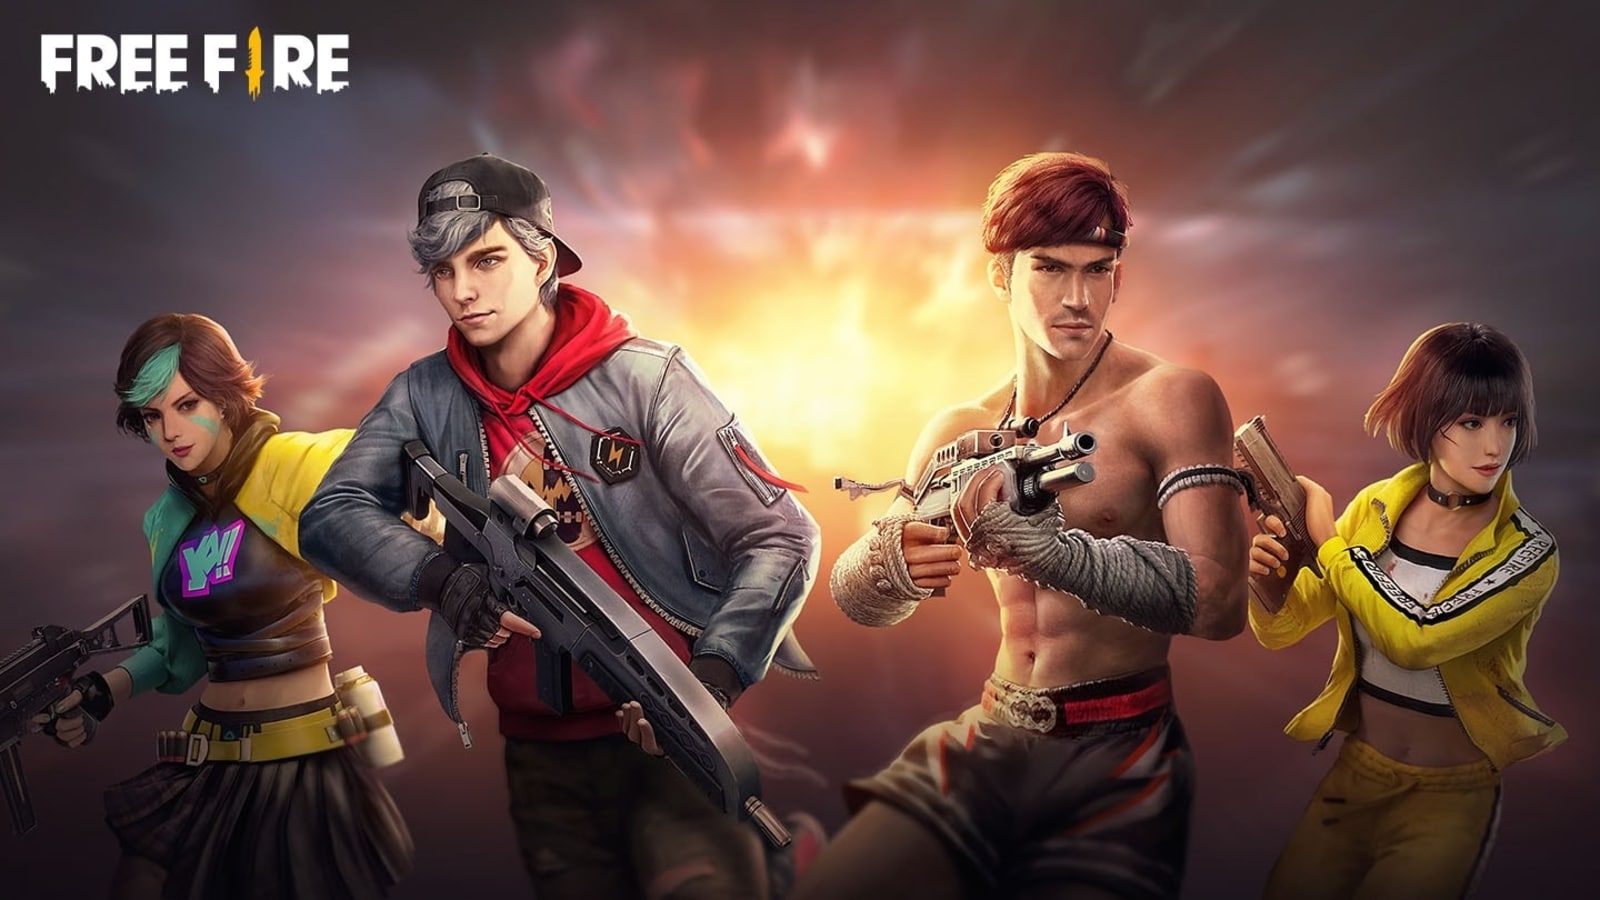 Garena Free Fire MAX Redeem Codes for September 10: Know about the September events and exciting freebies